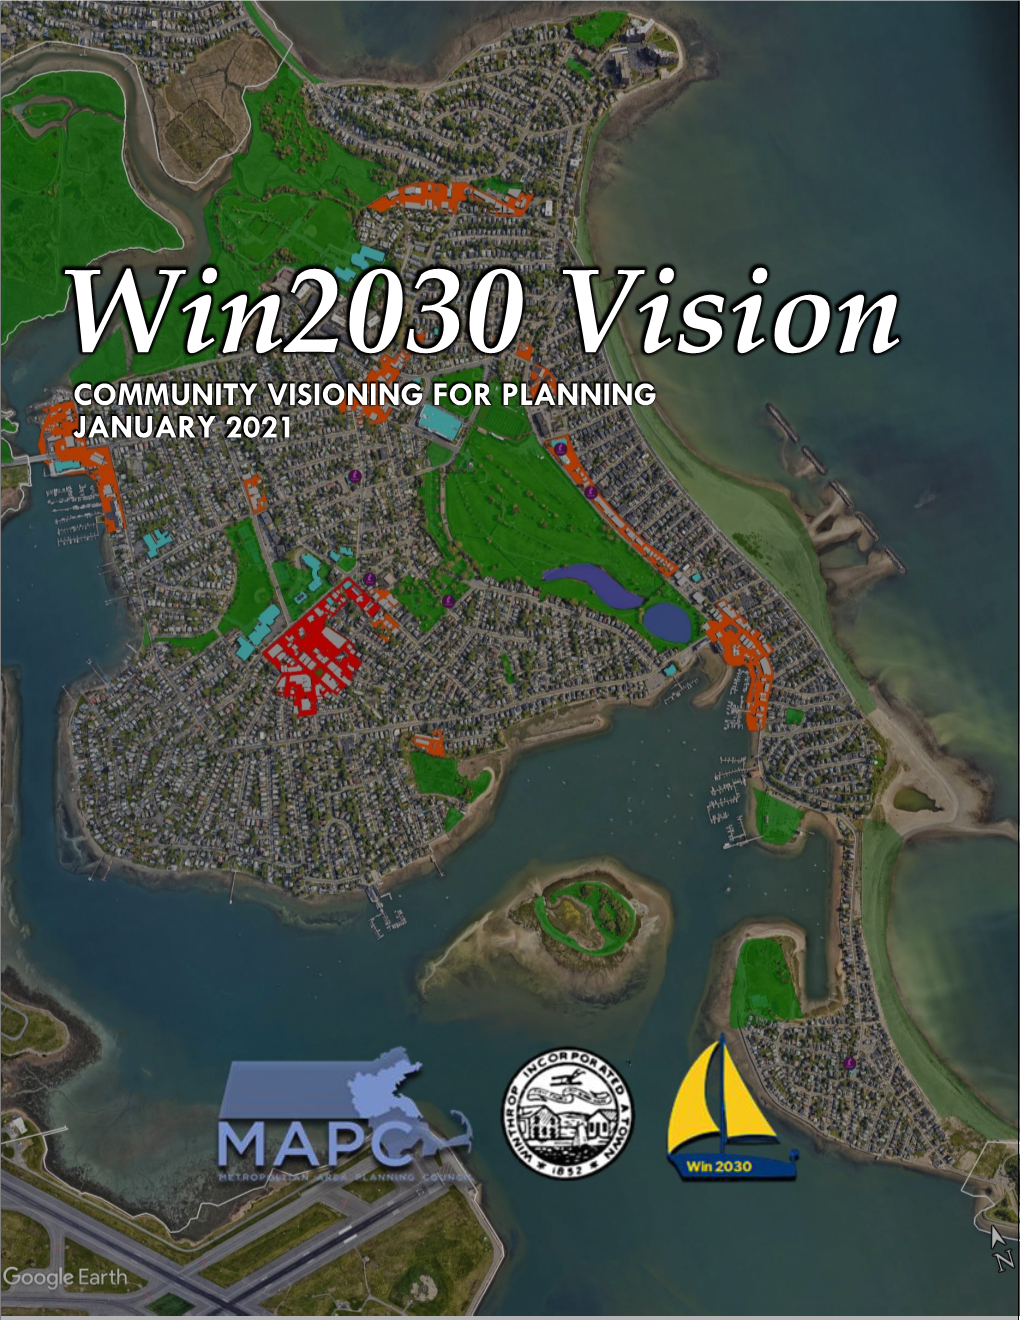 Community Visioning for Planning January 2021